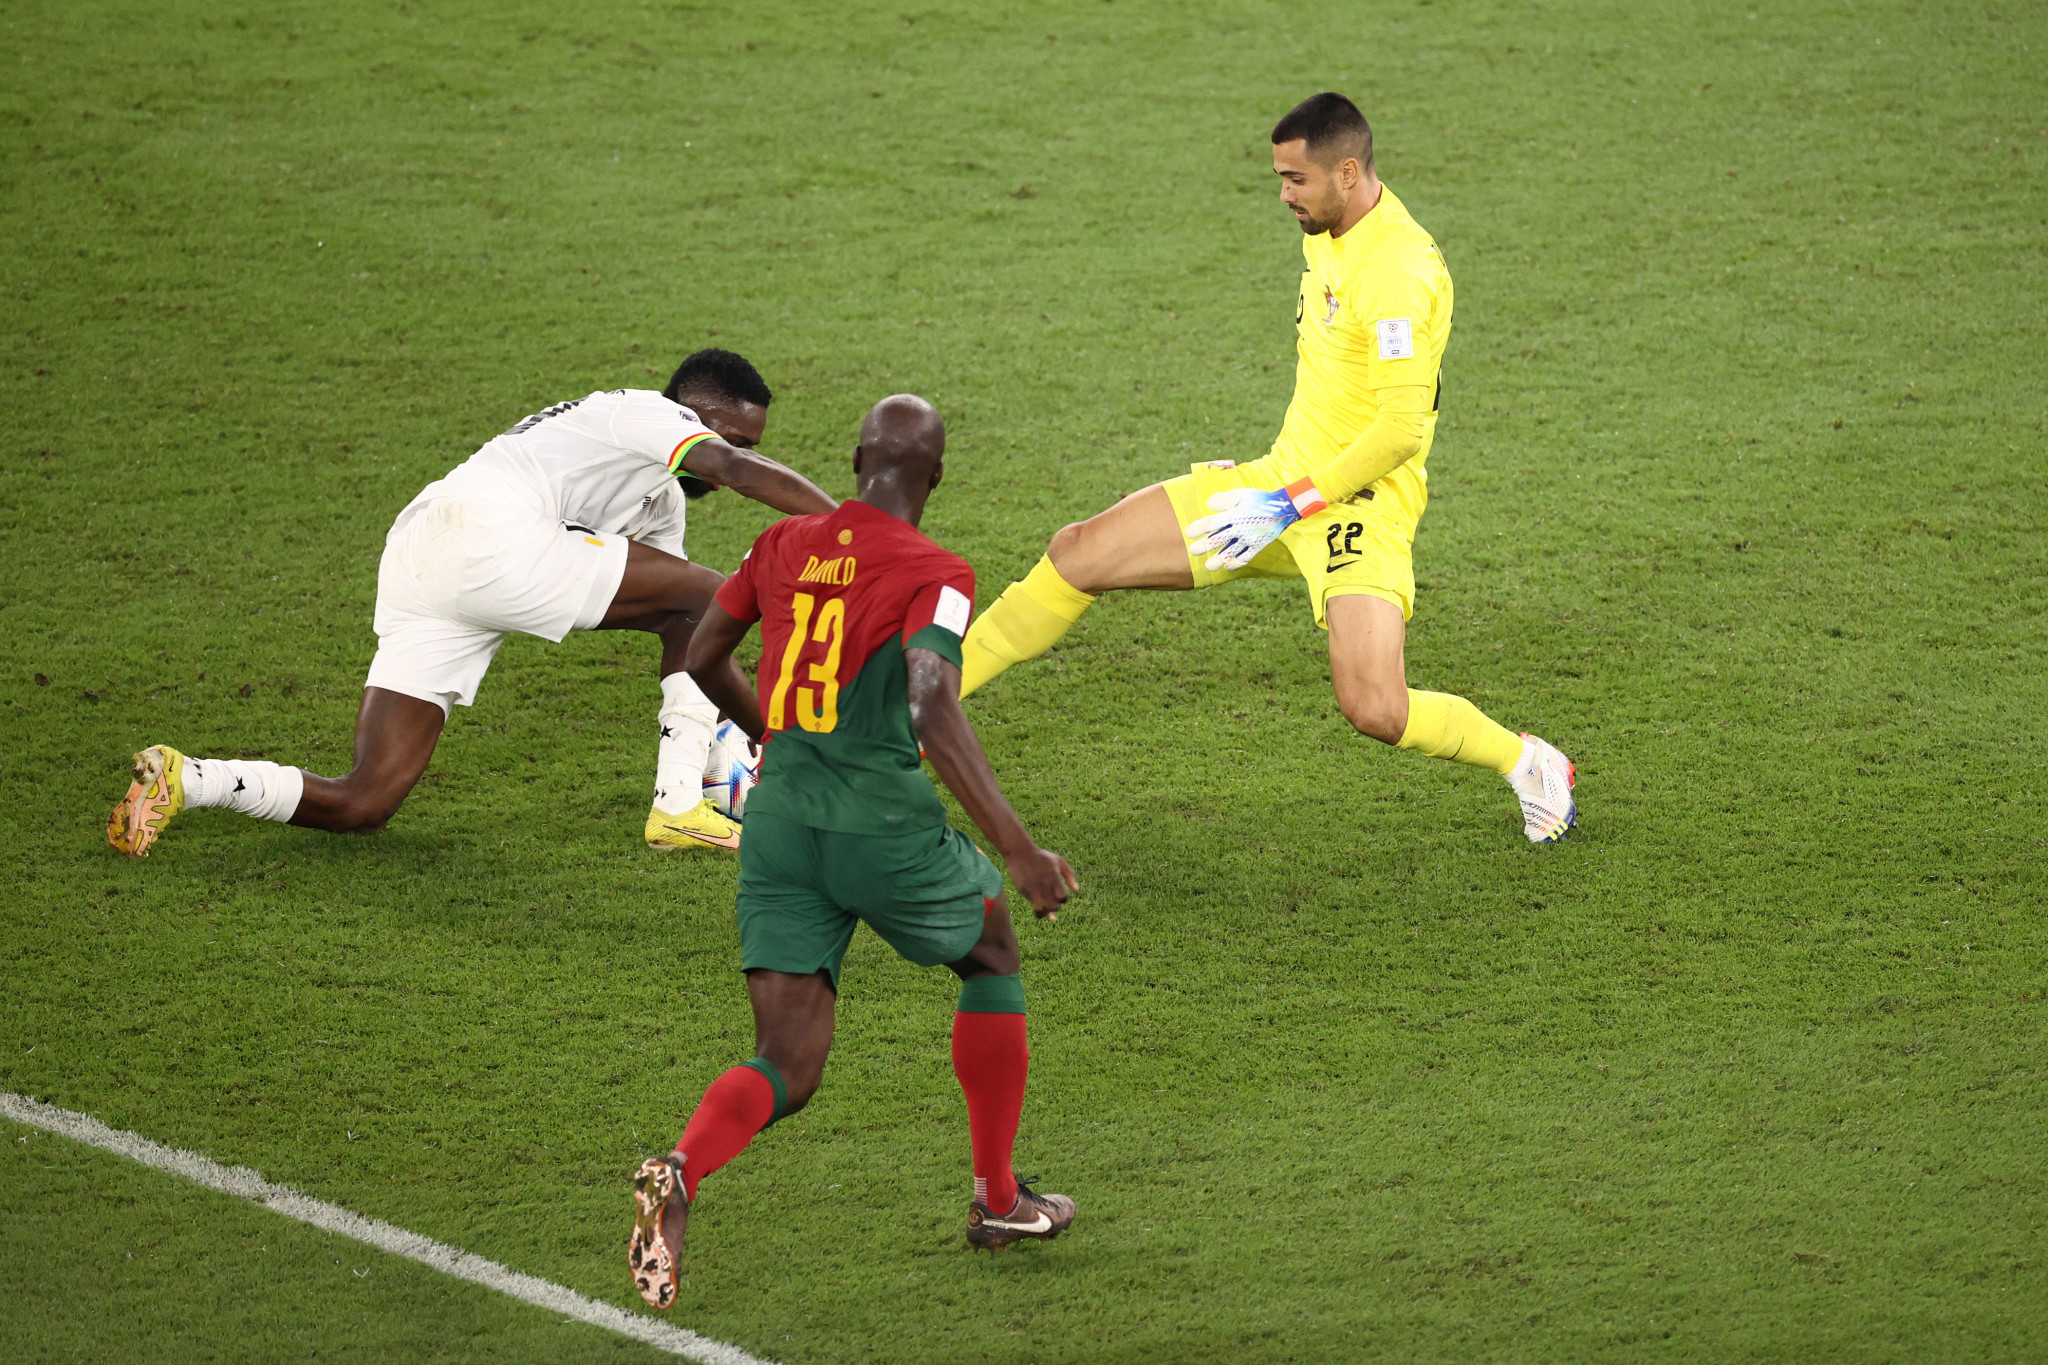 Portugal goalkeeper Diogo Costa put the ball down in the dying minutes unaware that Inaki Williams was behind him, but the forward could not take advantage of the situation ©Getty Images